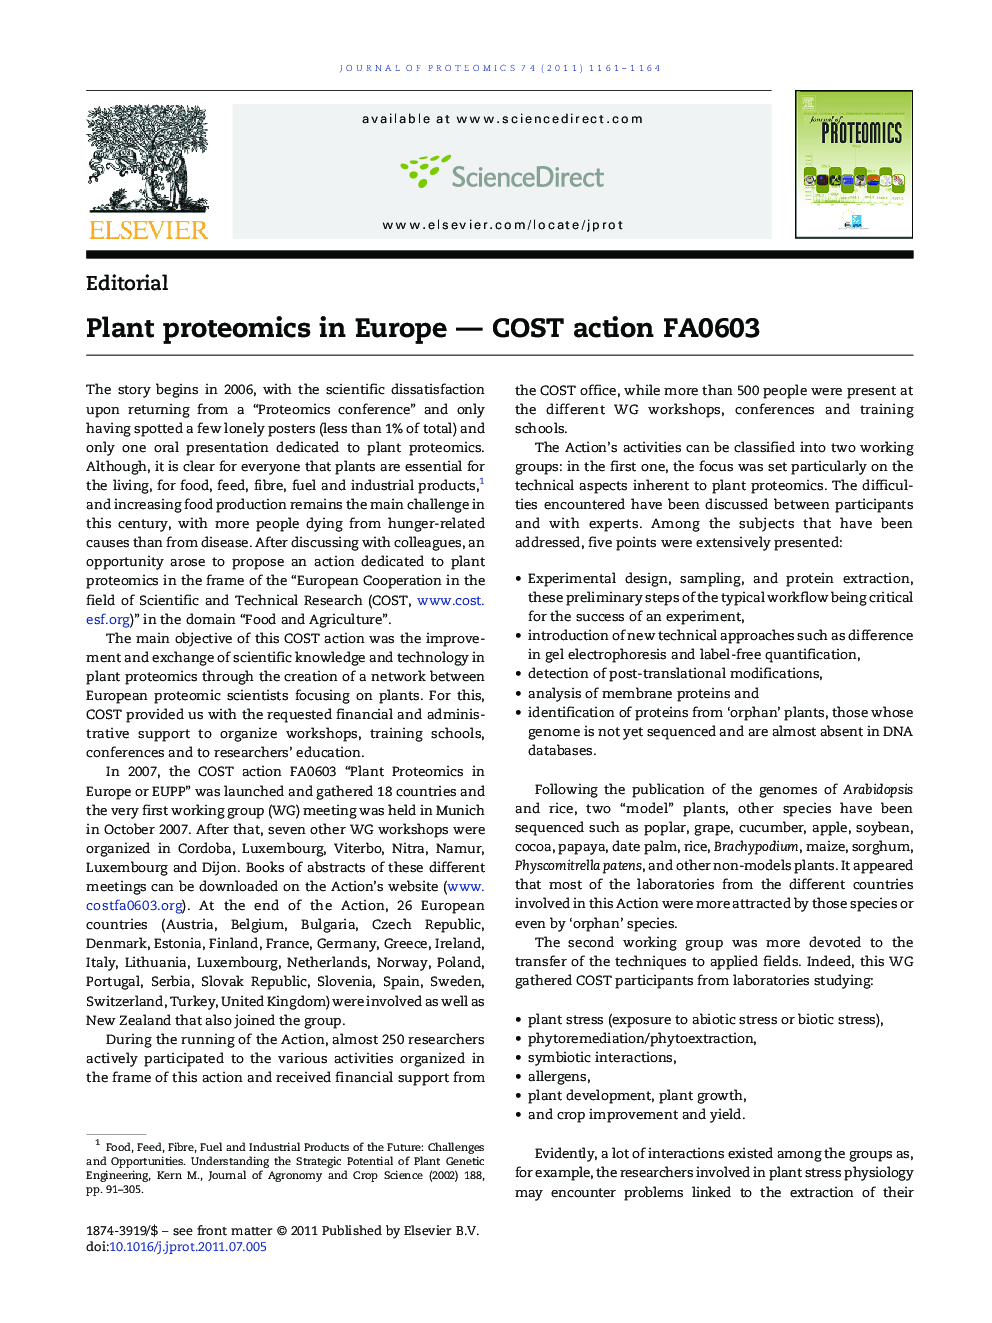 Plant proteomics in Europe - COST action FA0603